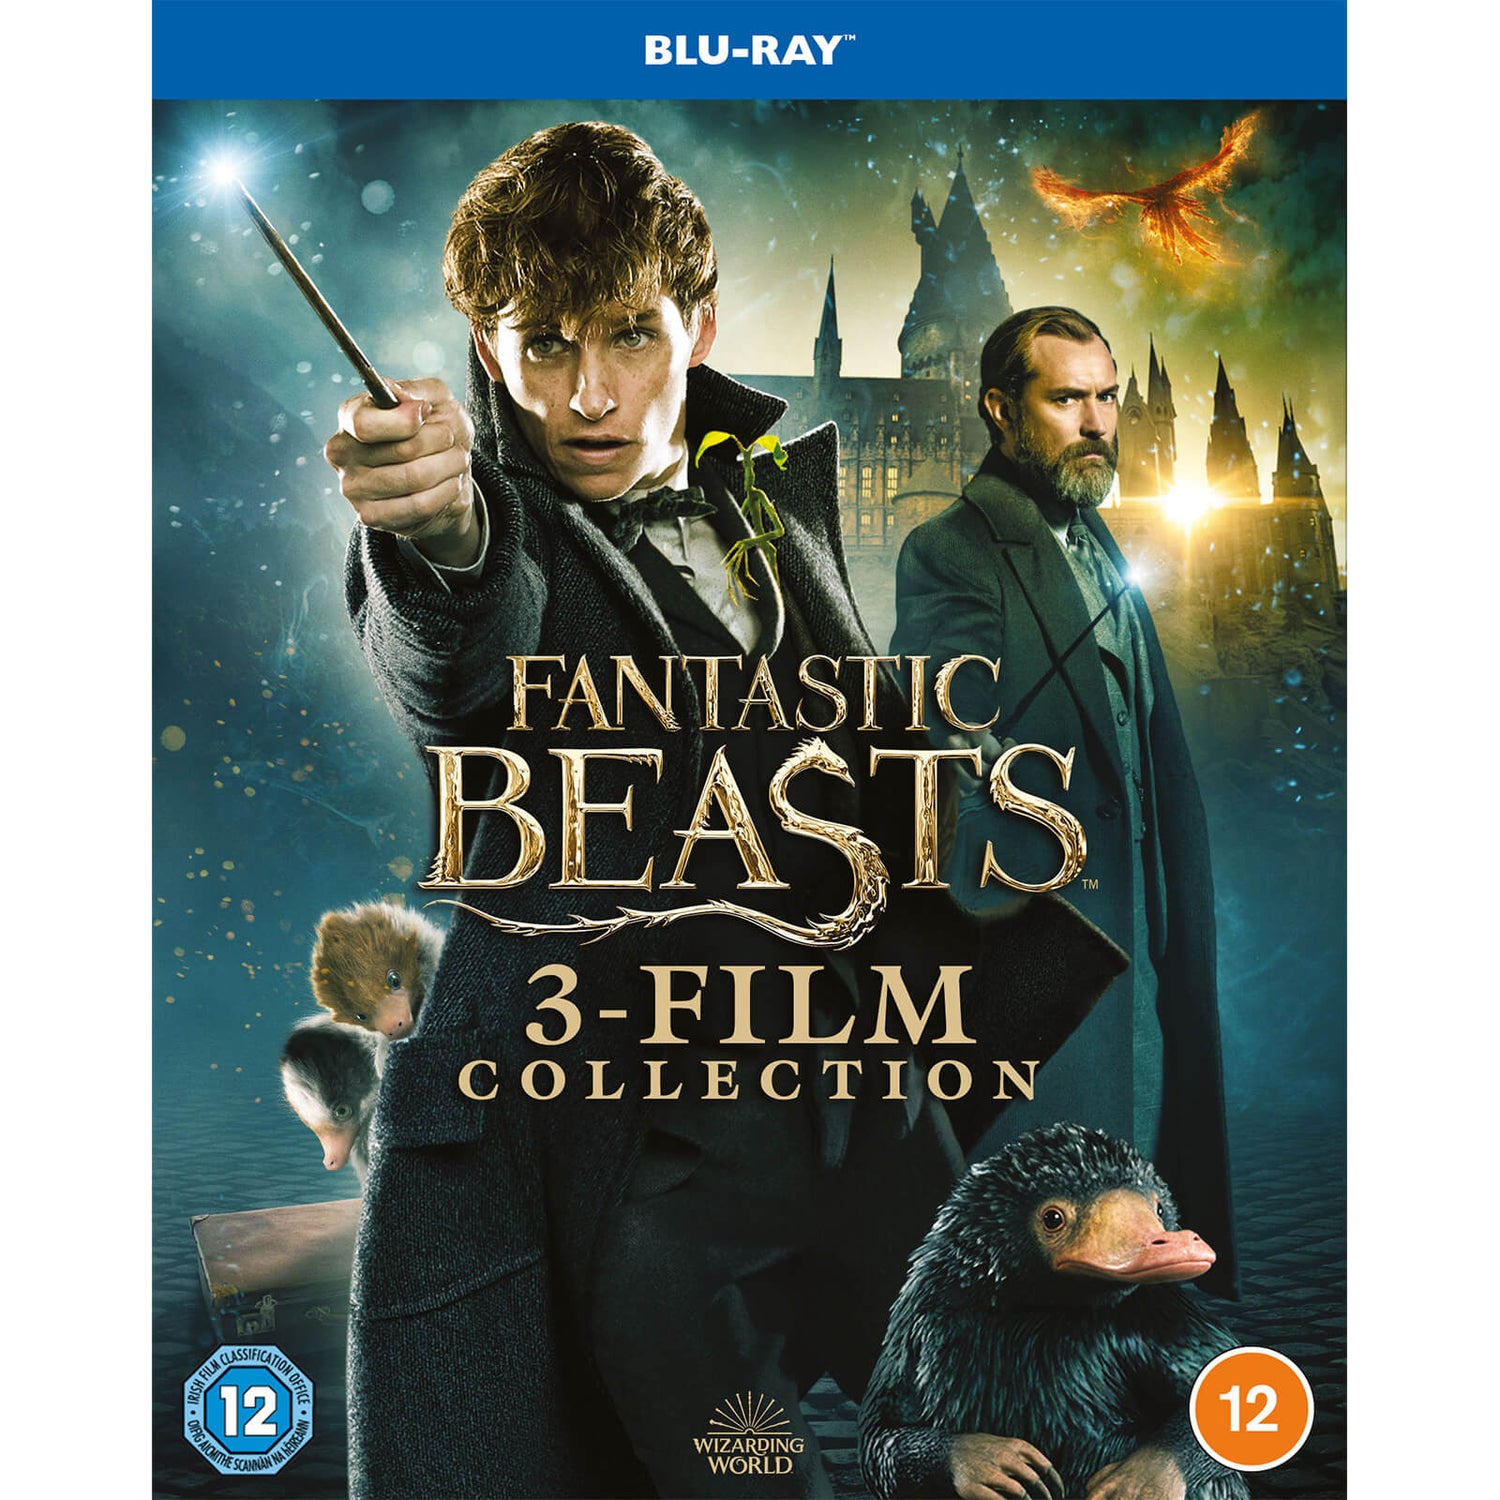 Fantastic Beasts 3 Film Collection